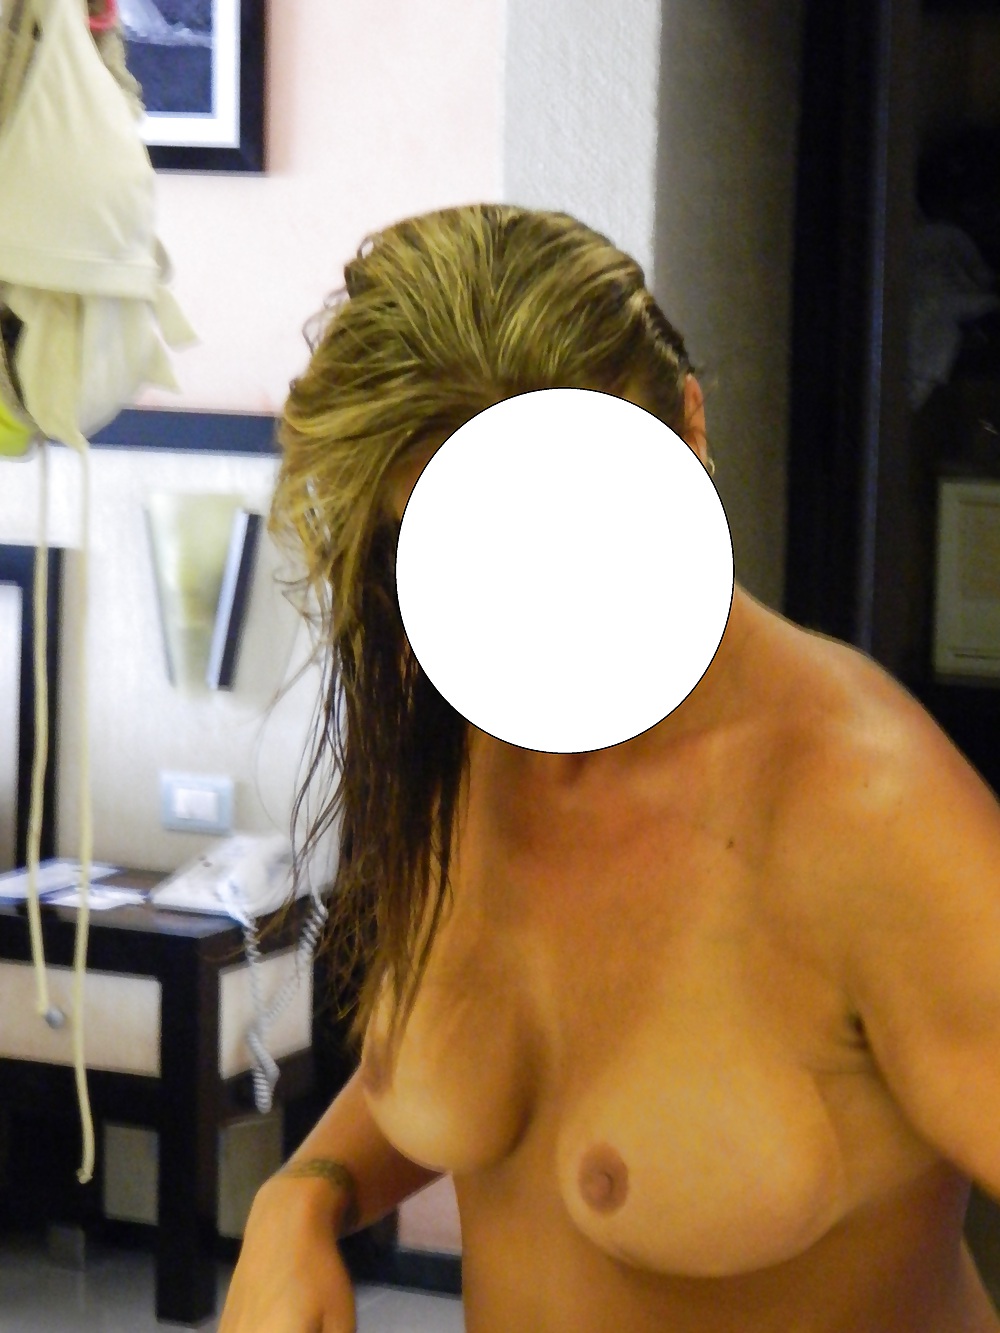 My wife's sexy tits and pokies!!!  Part 1 #16023941